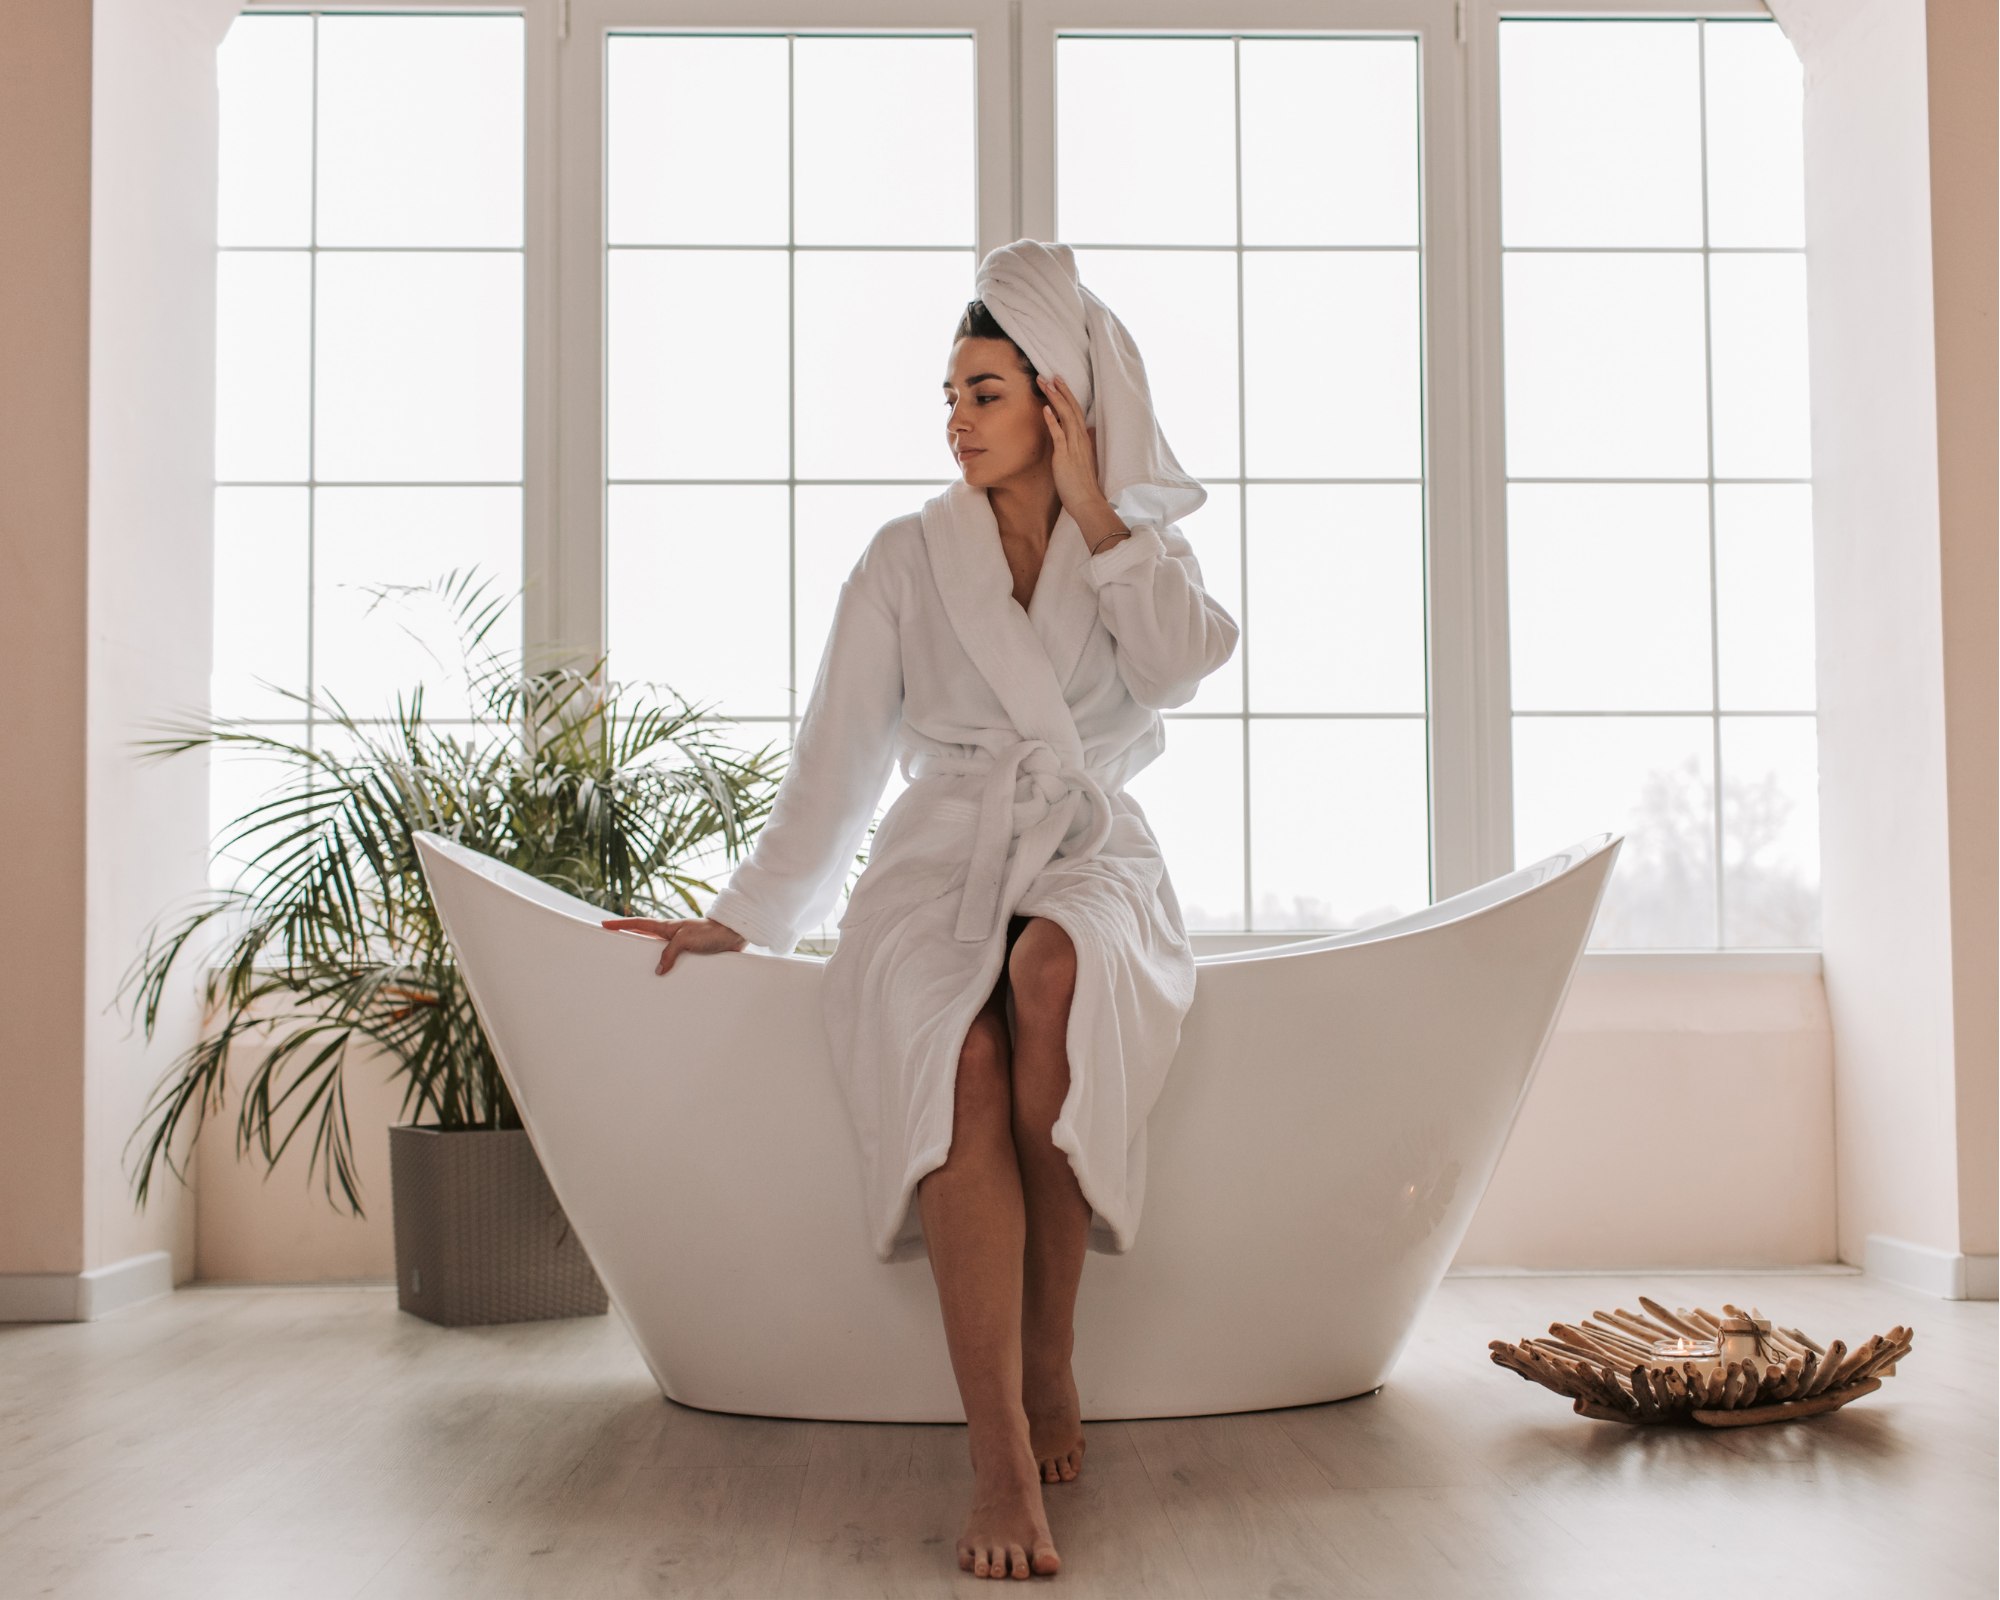 8 Alluring Ways to Take Better Care of Yourself – Shameless Self-Care Ideas For Your Most Vibrant Glow Up